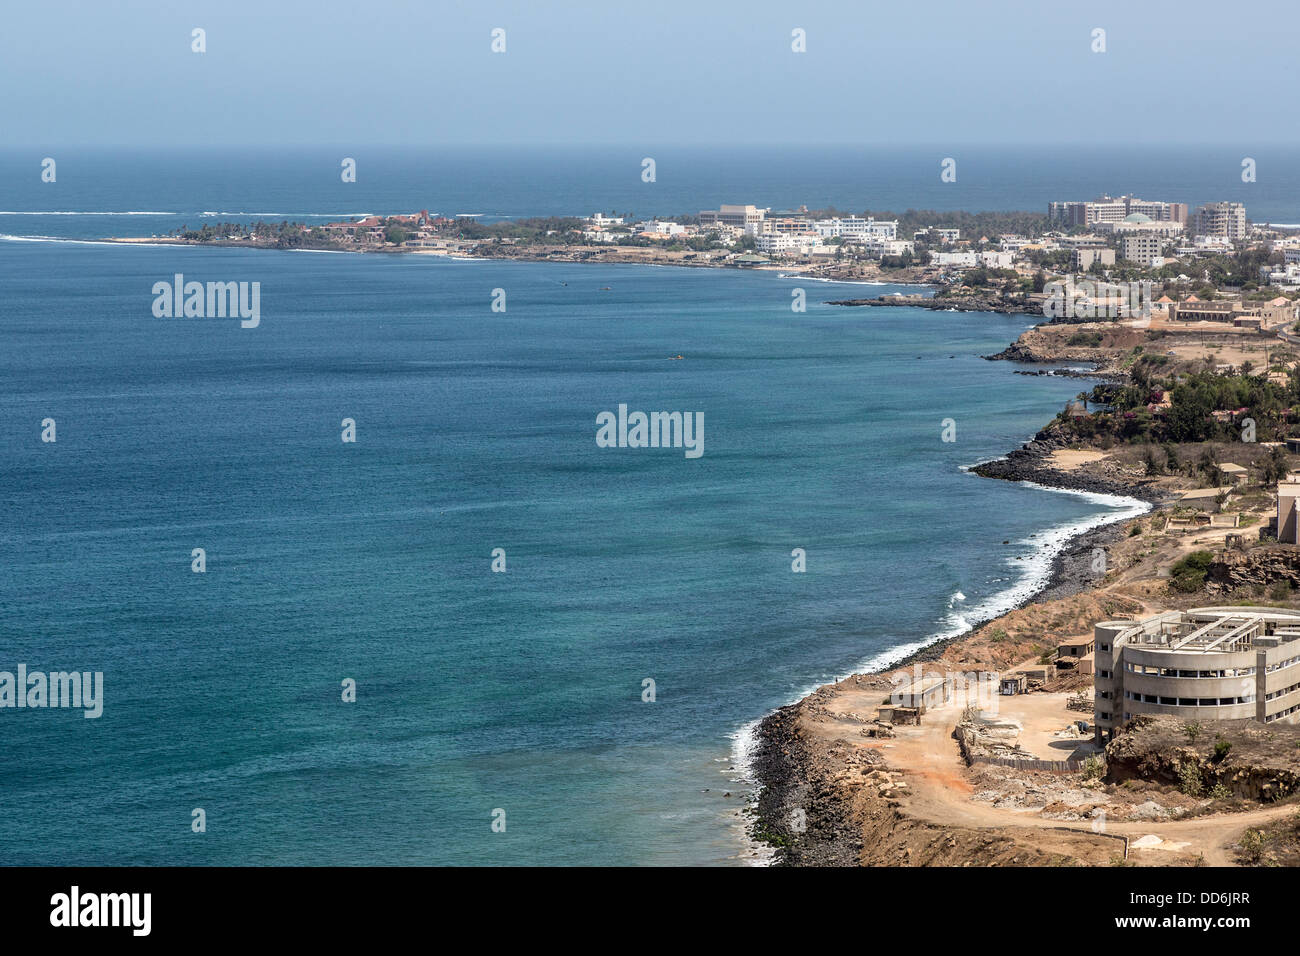 Dakar, Senegal. Les Almadies, a Dakar suburb. The westernmost point of the African continent is in the far left distance. Stock Photo